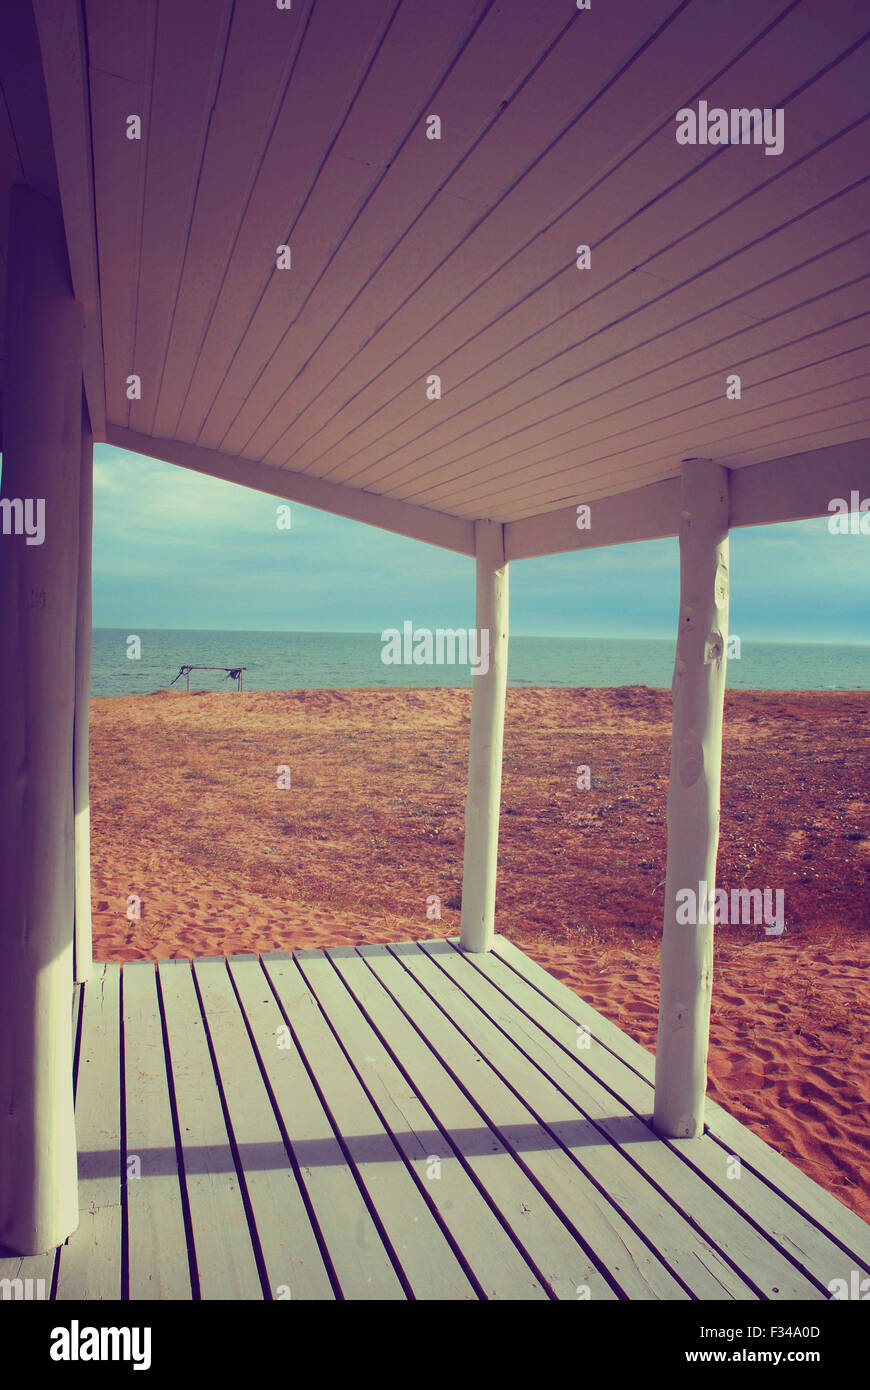 White beach house porch with vintage style filter effect and ocean view background. Stock Photo